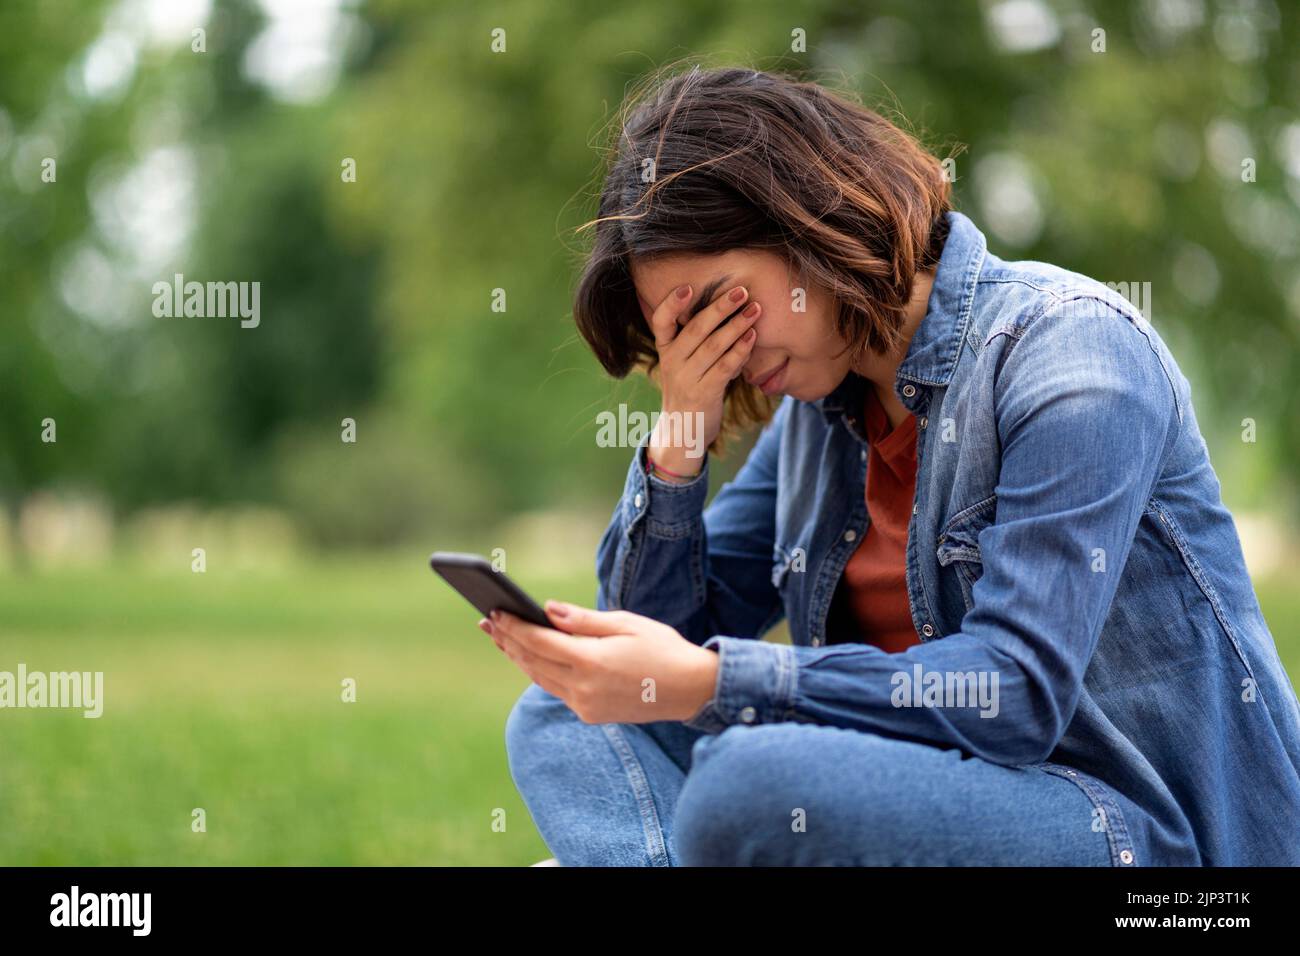 Depressed Young Arab Woman Sitting Outdoors With Smartphone In Hands And Crying Stock Photo